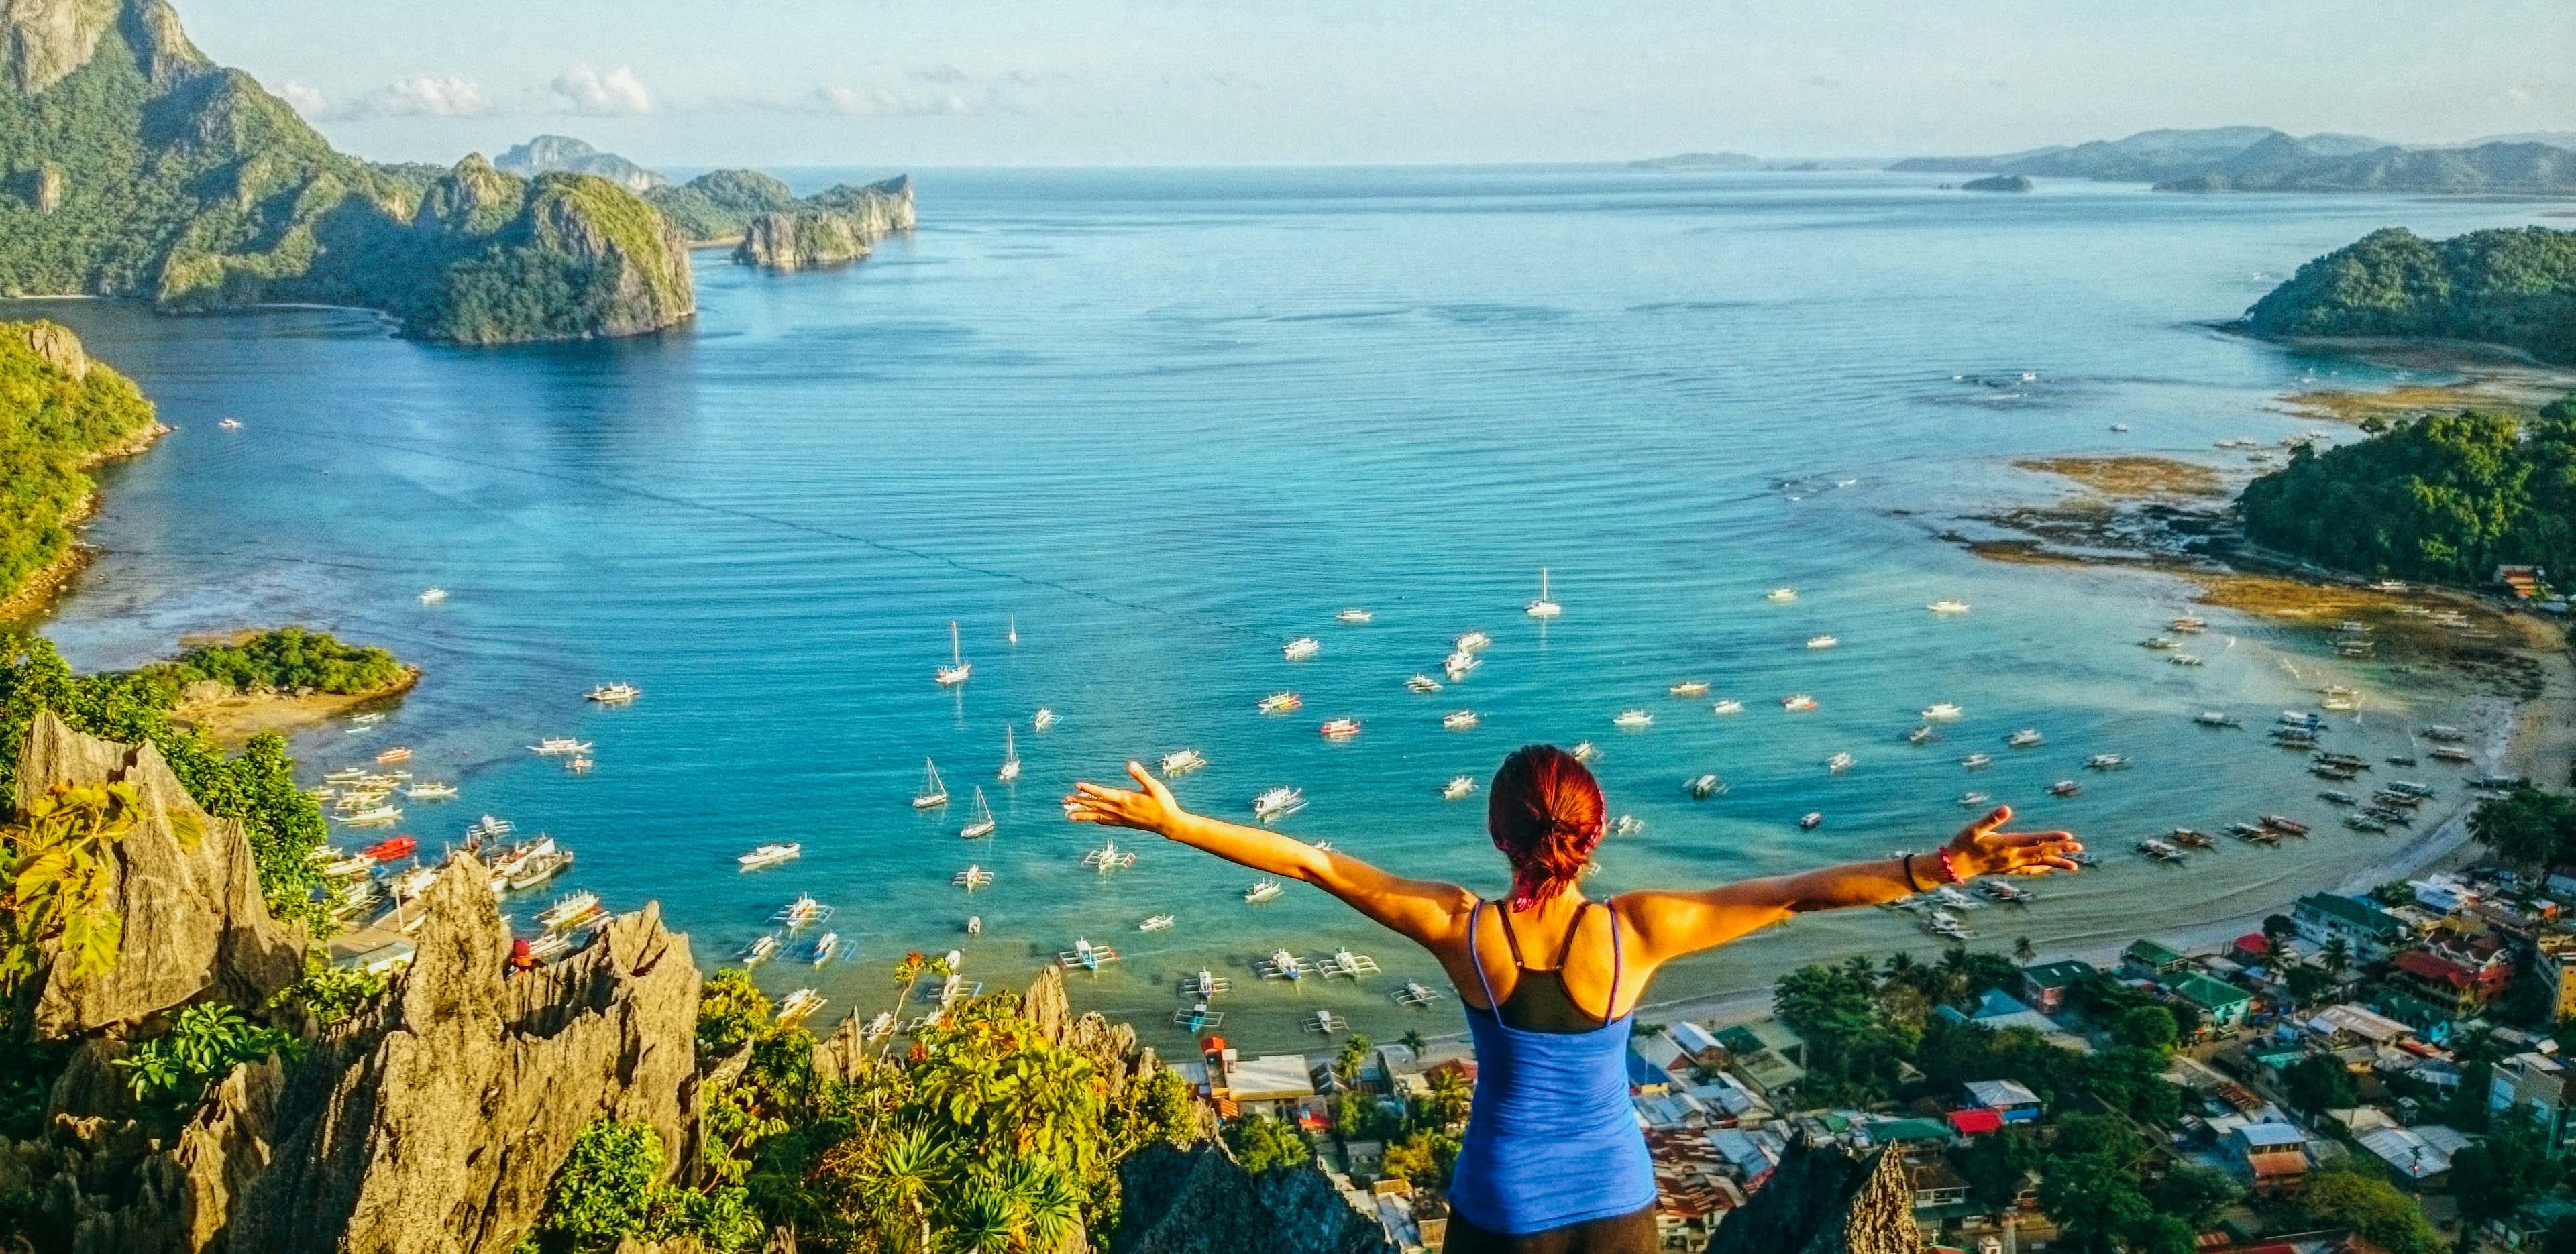 BIRD'S EYE VIEW. Take on the challenge of climbing Taraw Cliff to get an overlooking view of the town and the cerulean waters. Photo by Kacelyn Malunda (Instagram/@exploringkuting) 